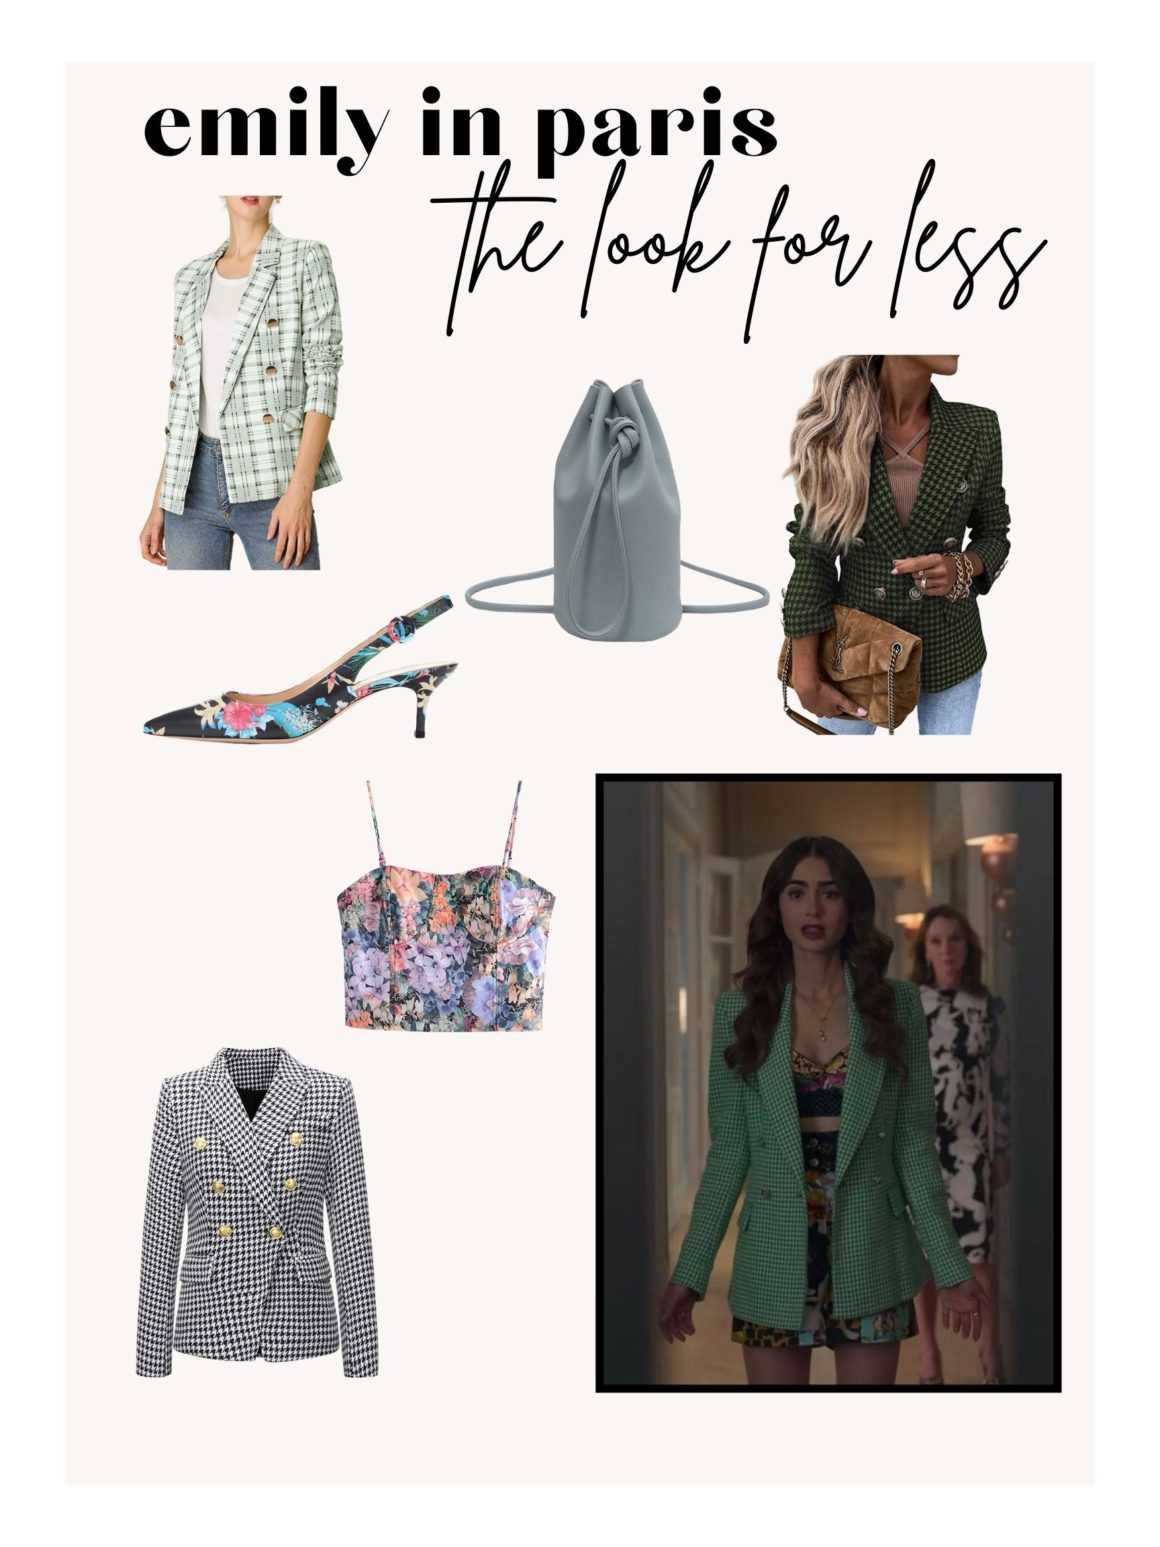 The Look For Less: Emily in Paris Fashion on